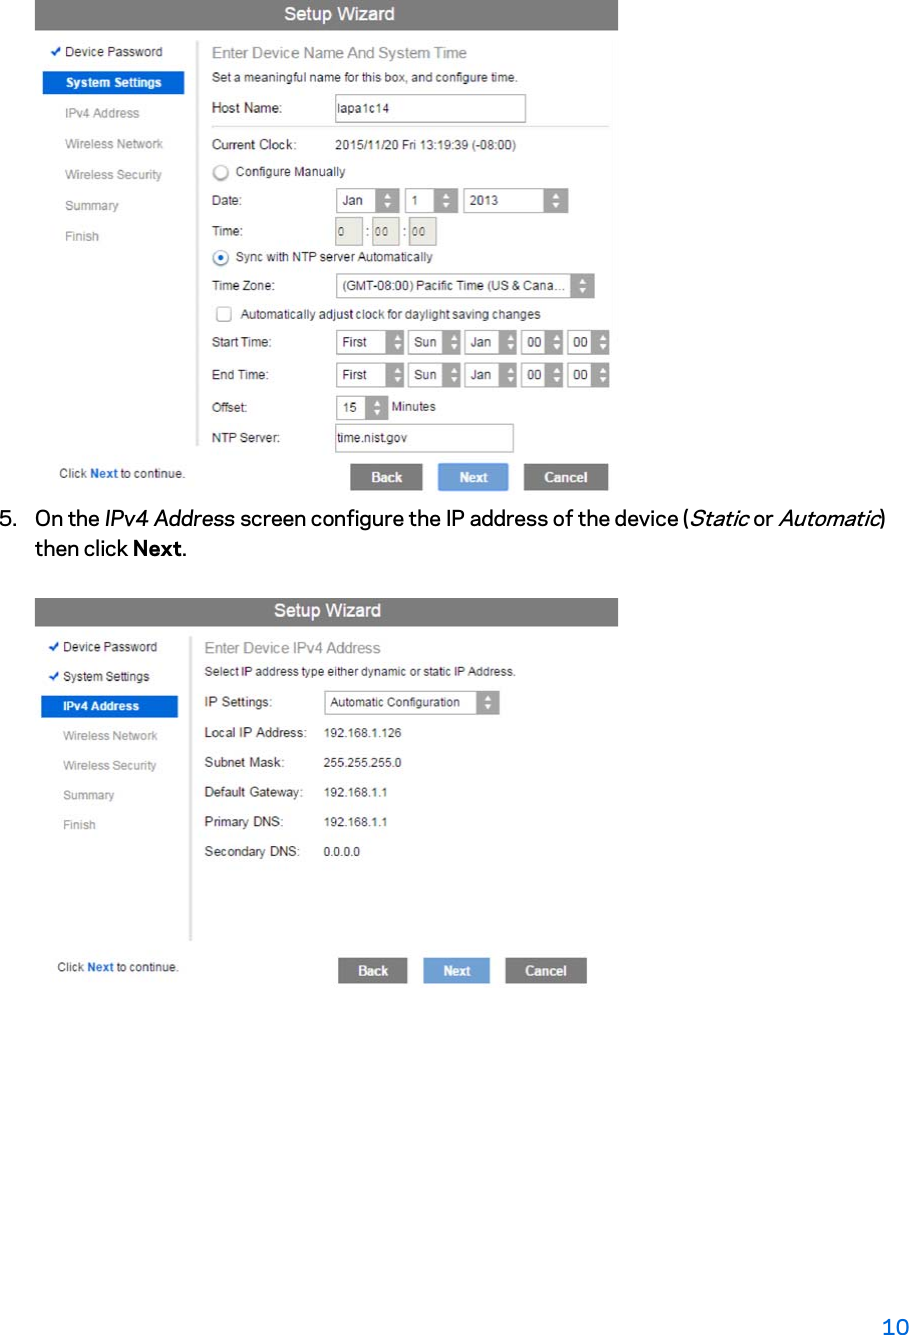 5. On the IPv4 Address screen configure the IP address of the device (Static or Automatic) then click Next.  10